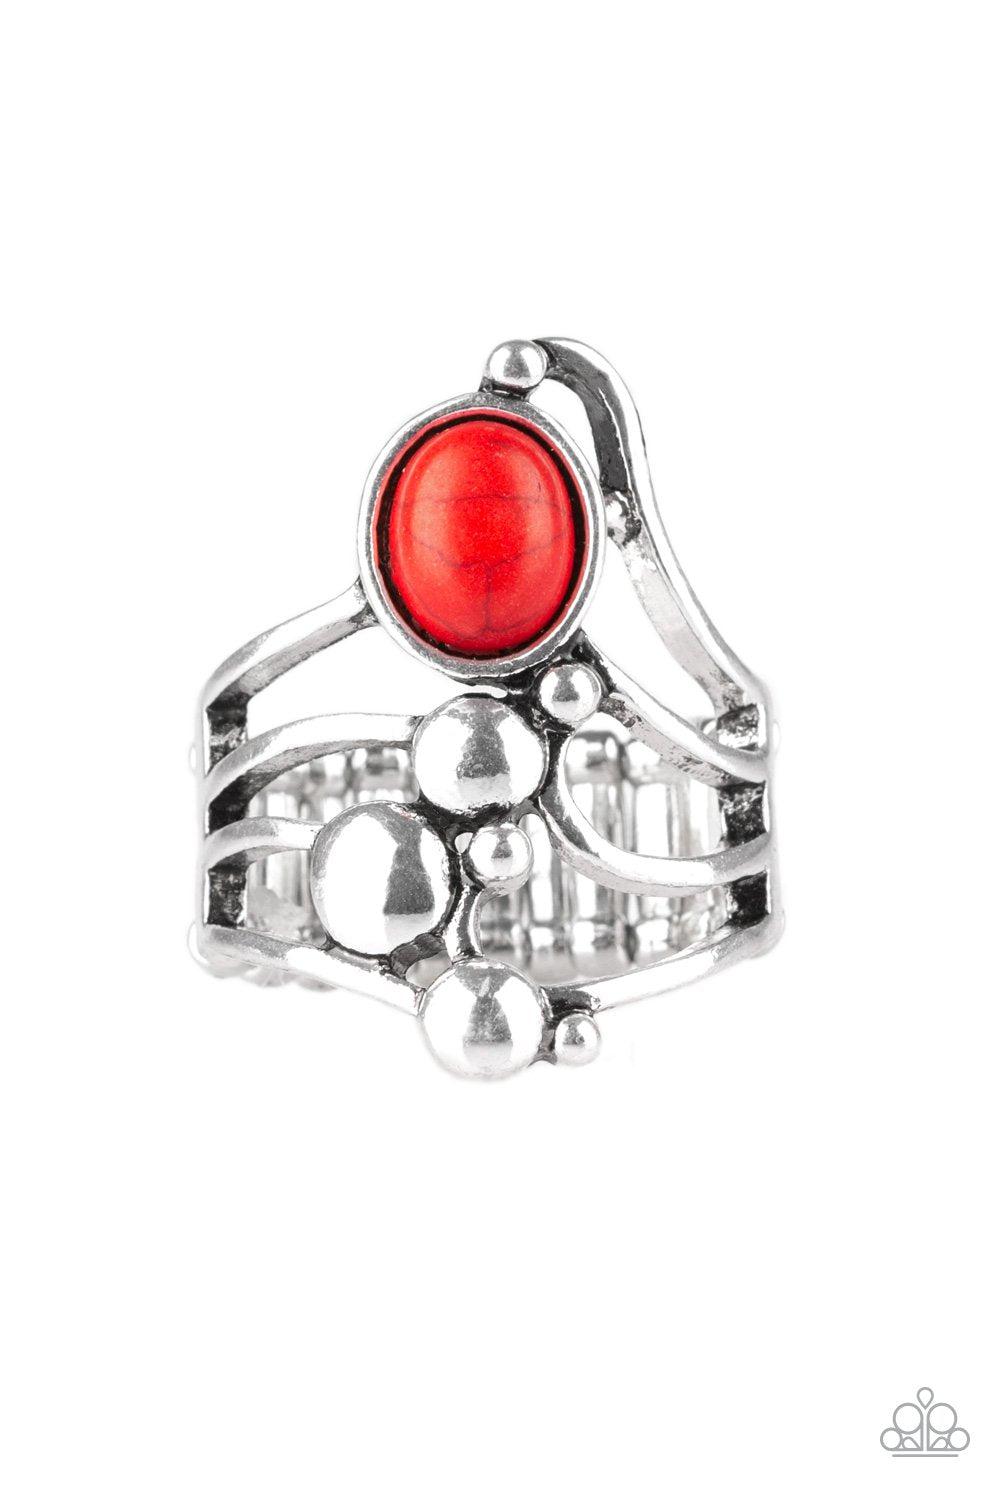 Wanderlust Wanderer Silver and Red Stone Ring - Paparazzi Accessories-CarasShop.com - $5 Jewelry by Cara Jewels